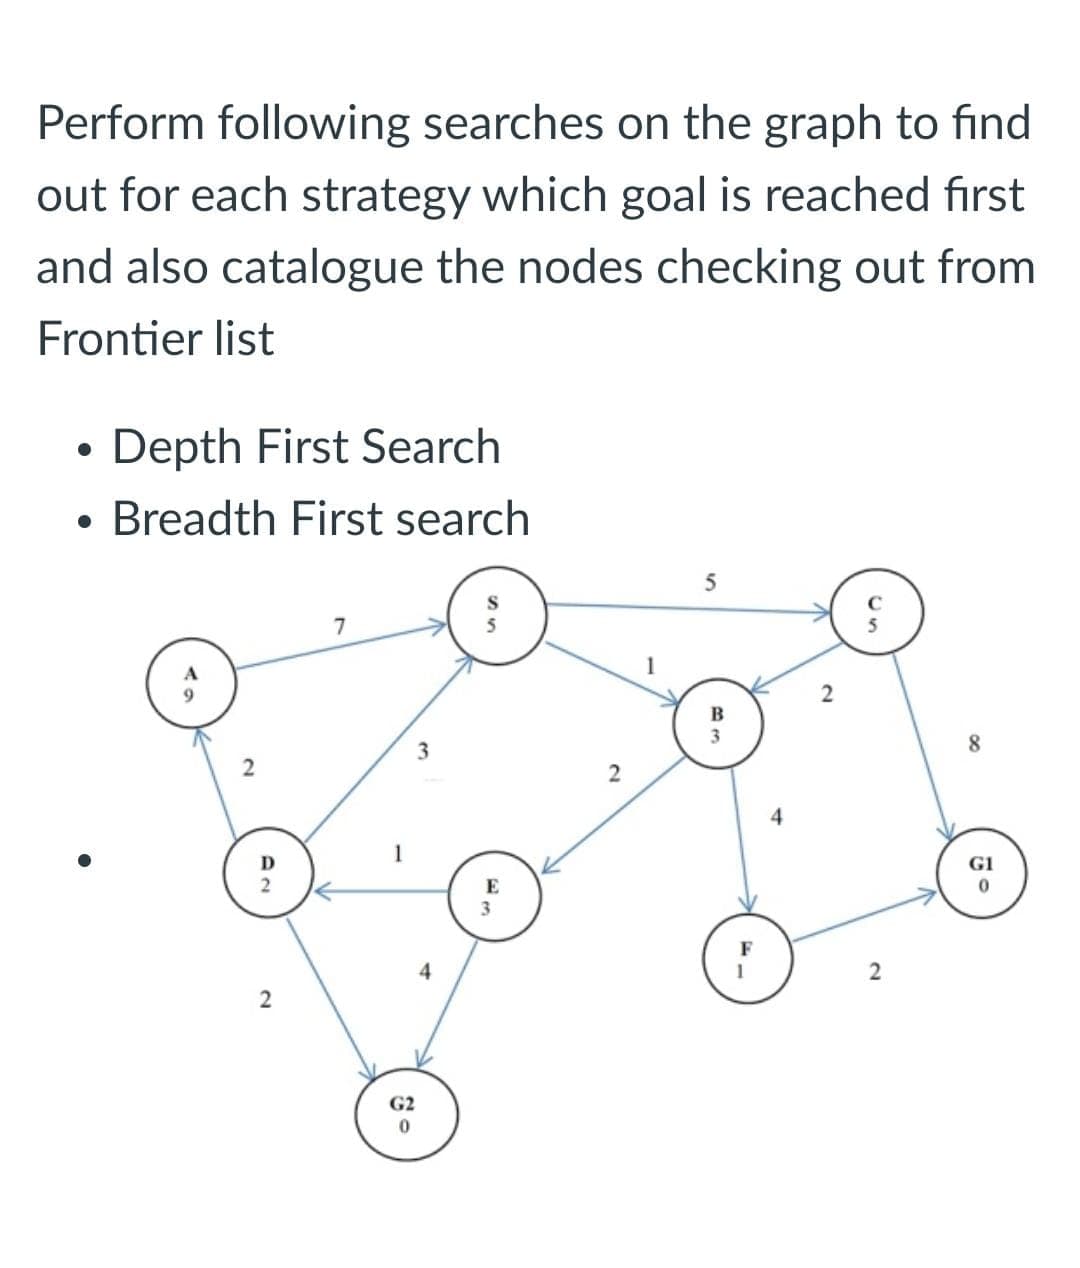 Perform following searches on the graph to find
out for each strategy which goal is reached first
and also catalogue the nodes checking out from
Frontier list
Depth First Search
Breadth First search
2
8
2
2
4
1
G1
F
4
2
G2
